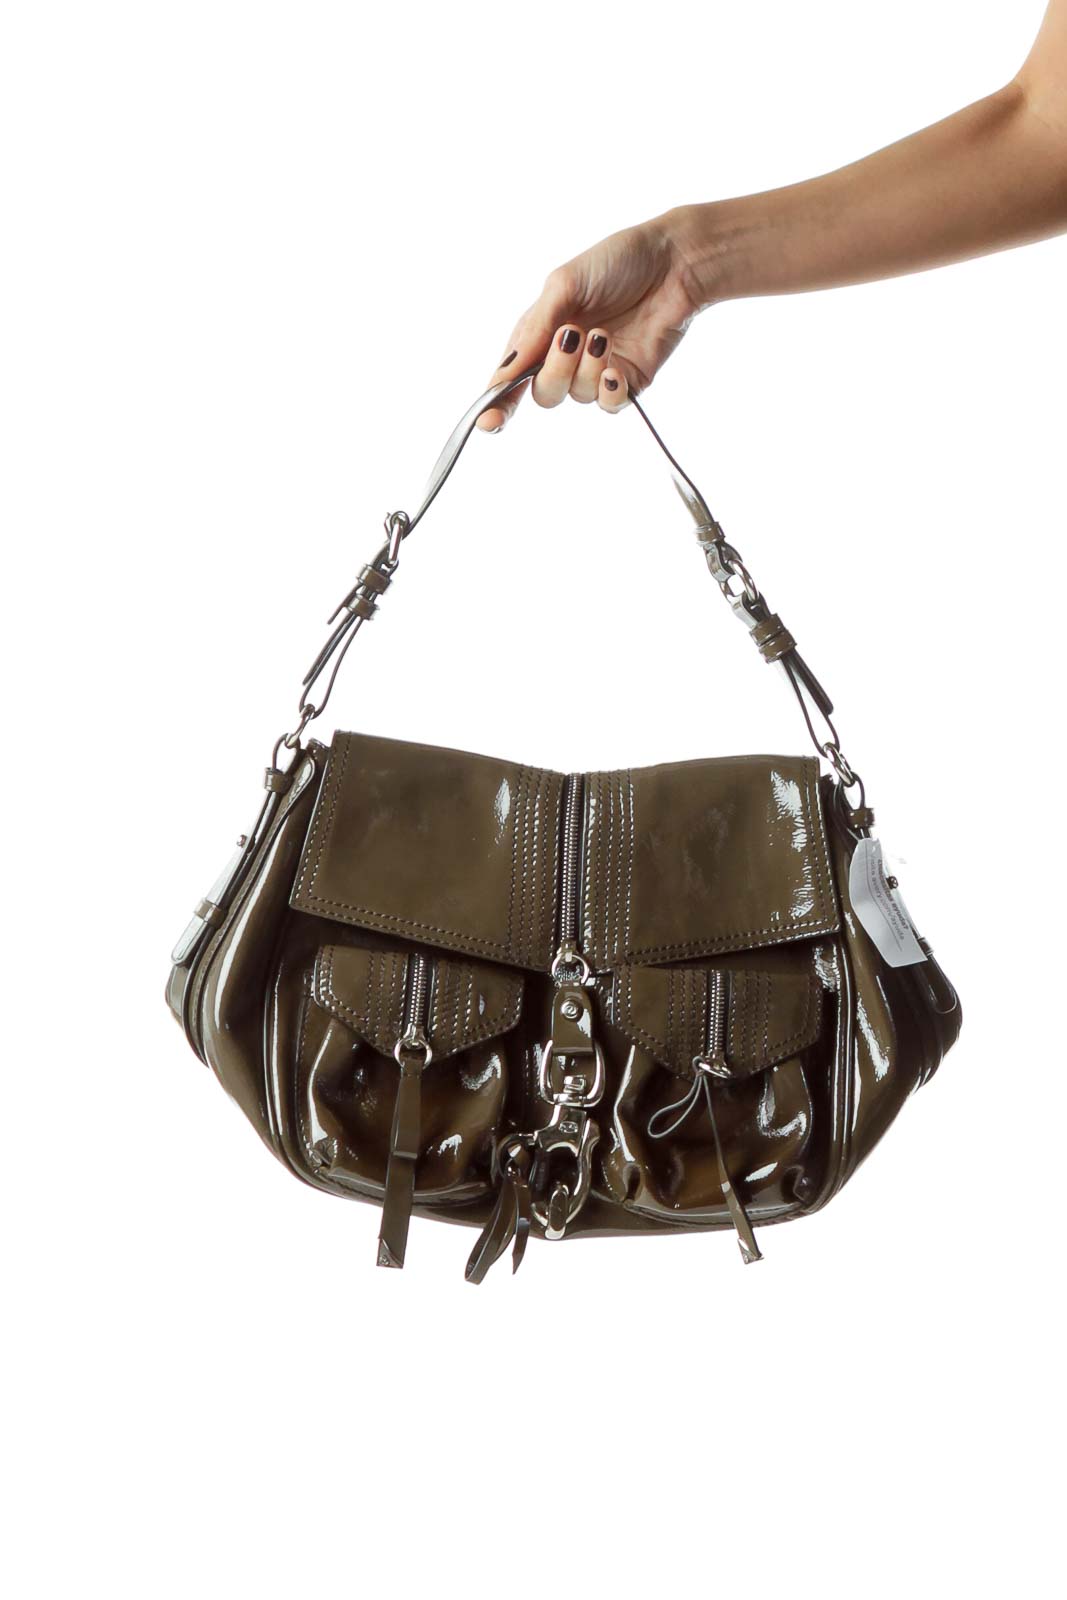 Gray Metal and Zipper Accents Leather Bag Front